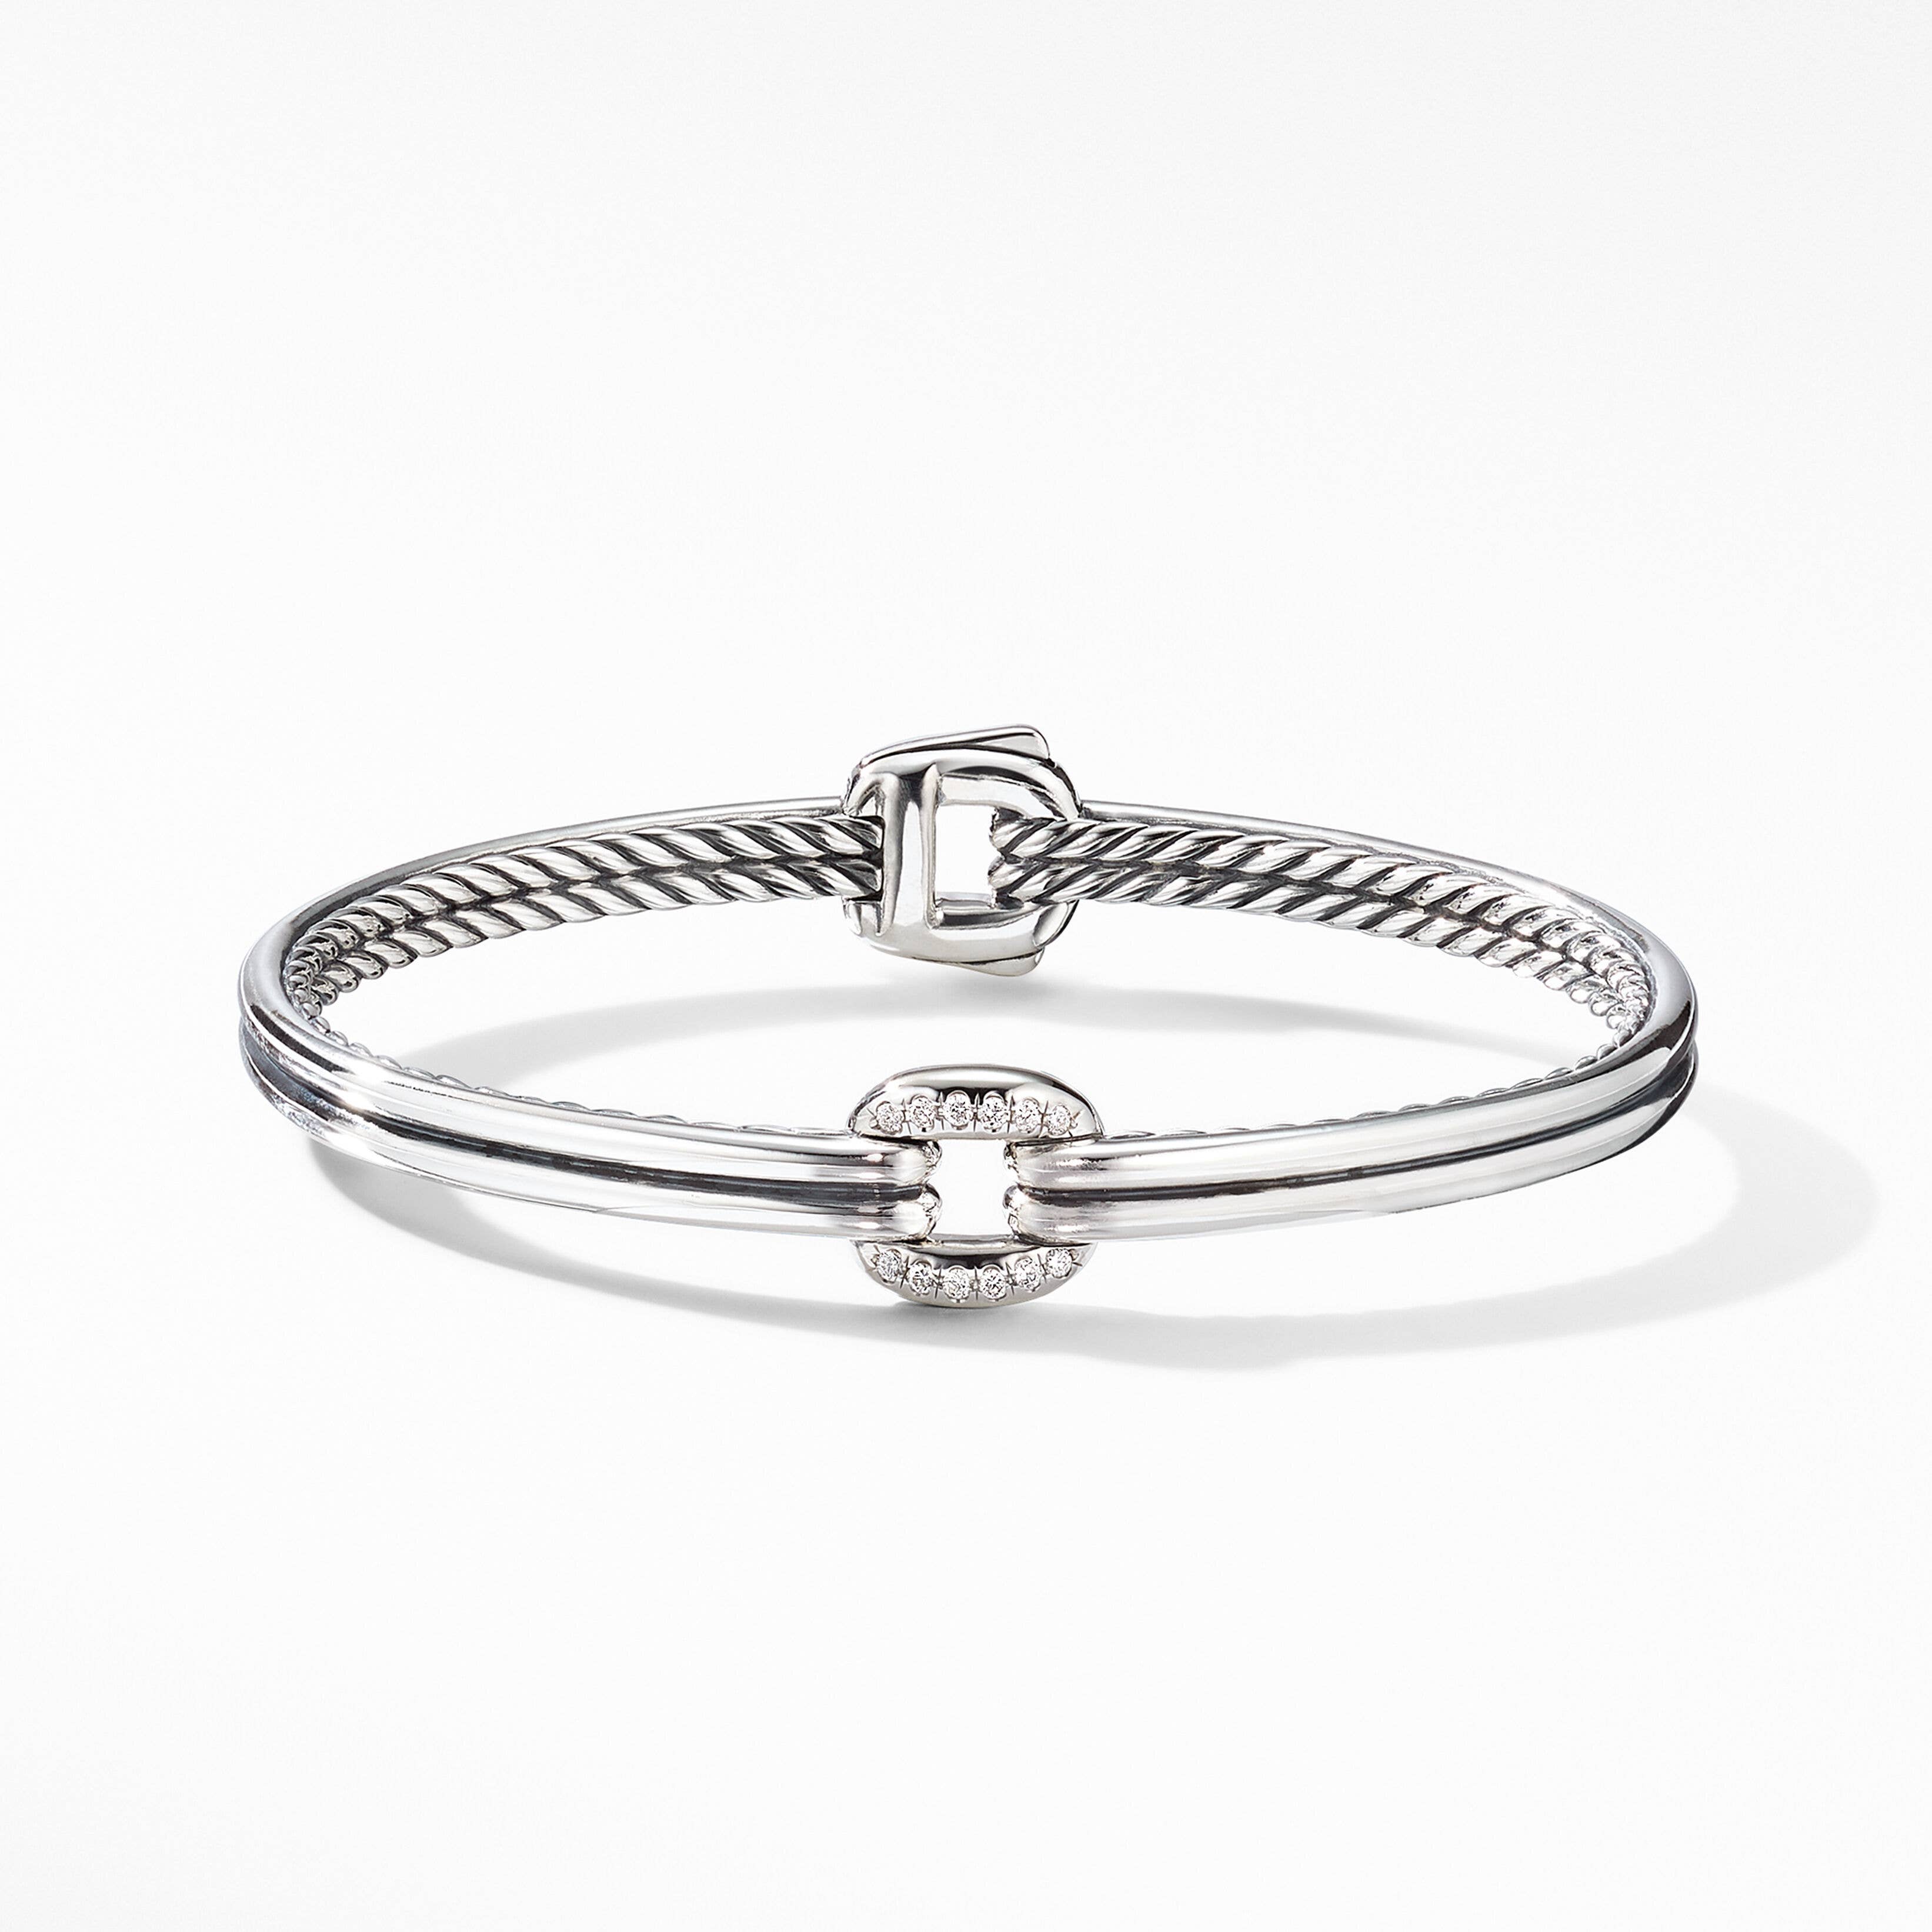 Thoroughbred Center Link Bracelet in Sterling Silver with Pavé Diamonds